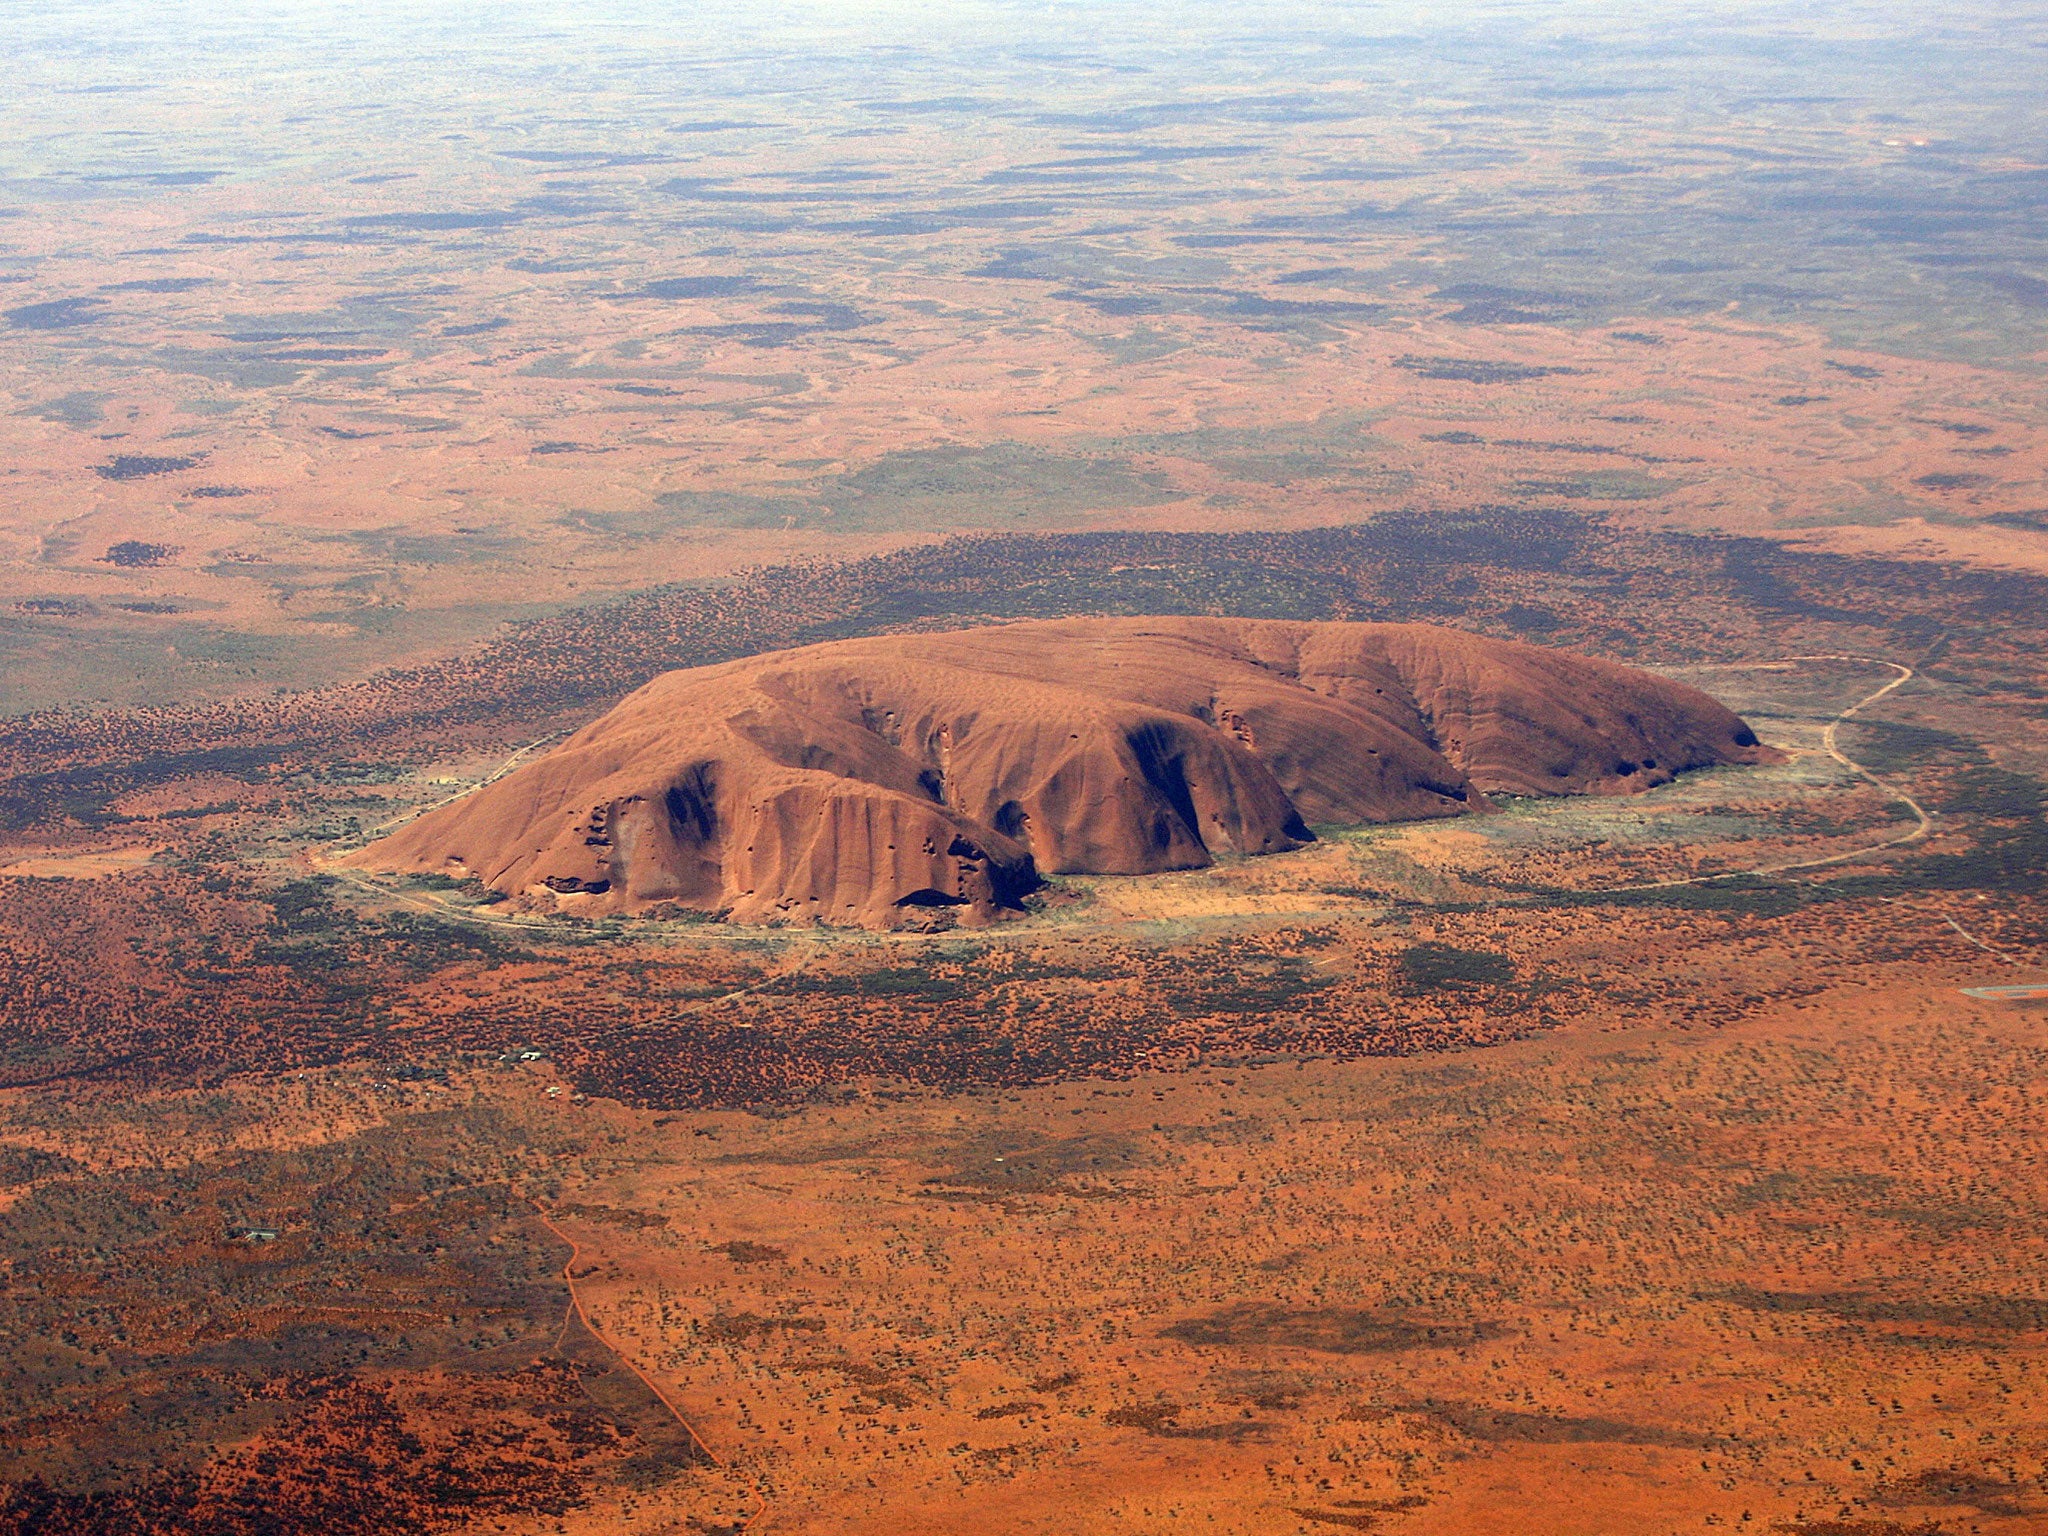 Uluru, also known as Ayers Rock